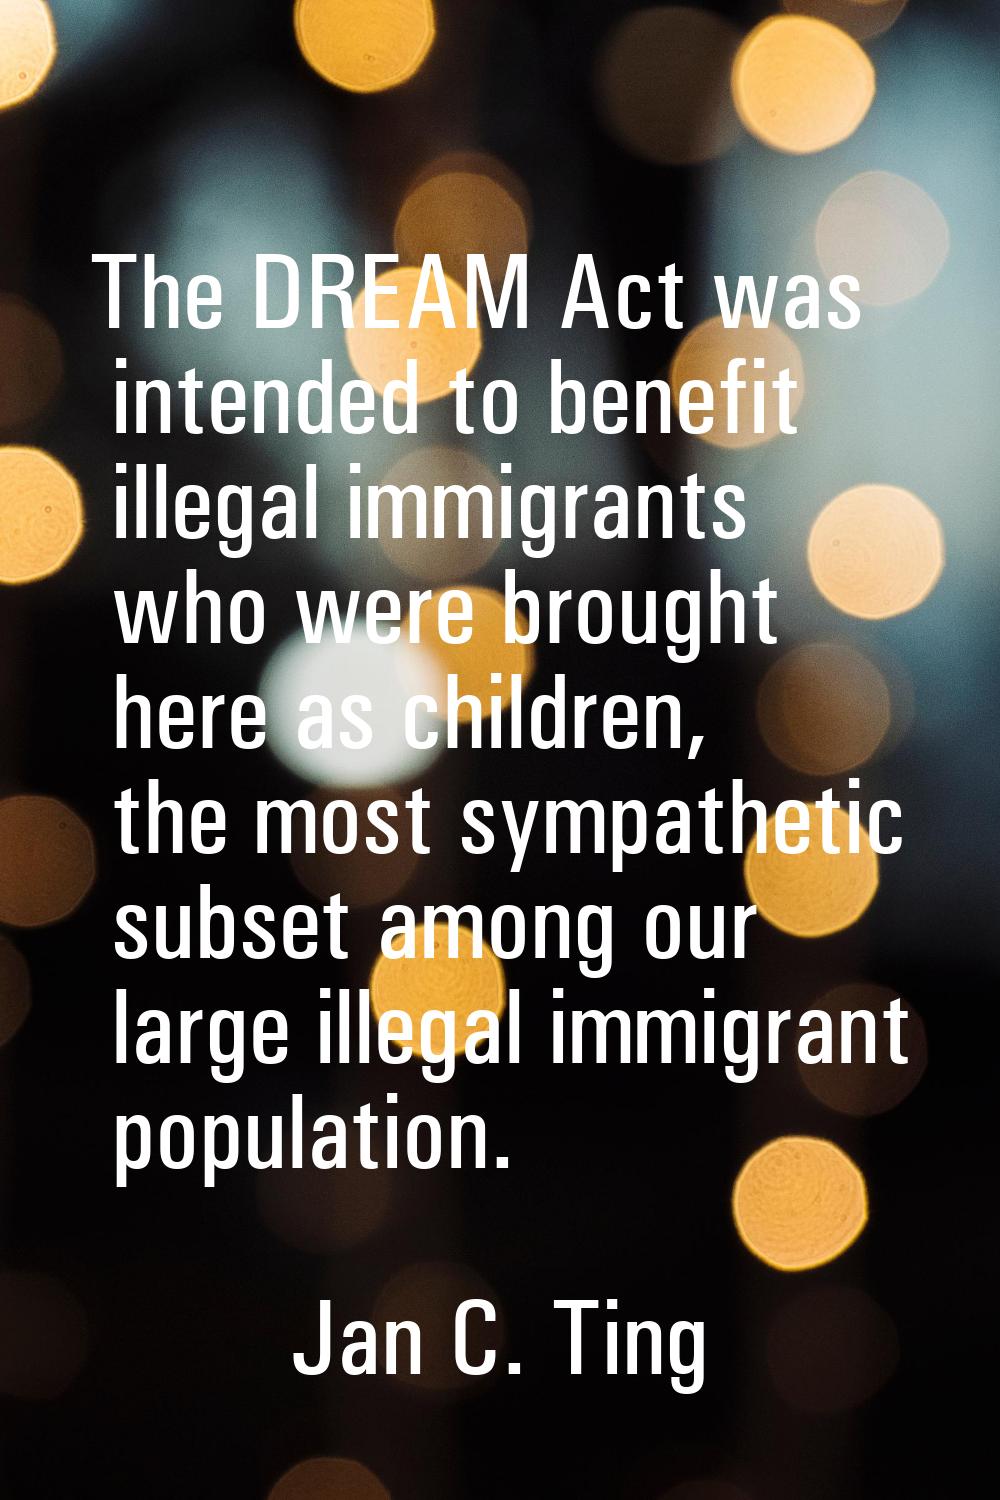 The DREAM Act was intended to benefit illegal immigrants who were brought here as children, the mos